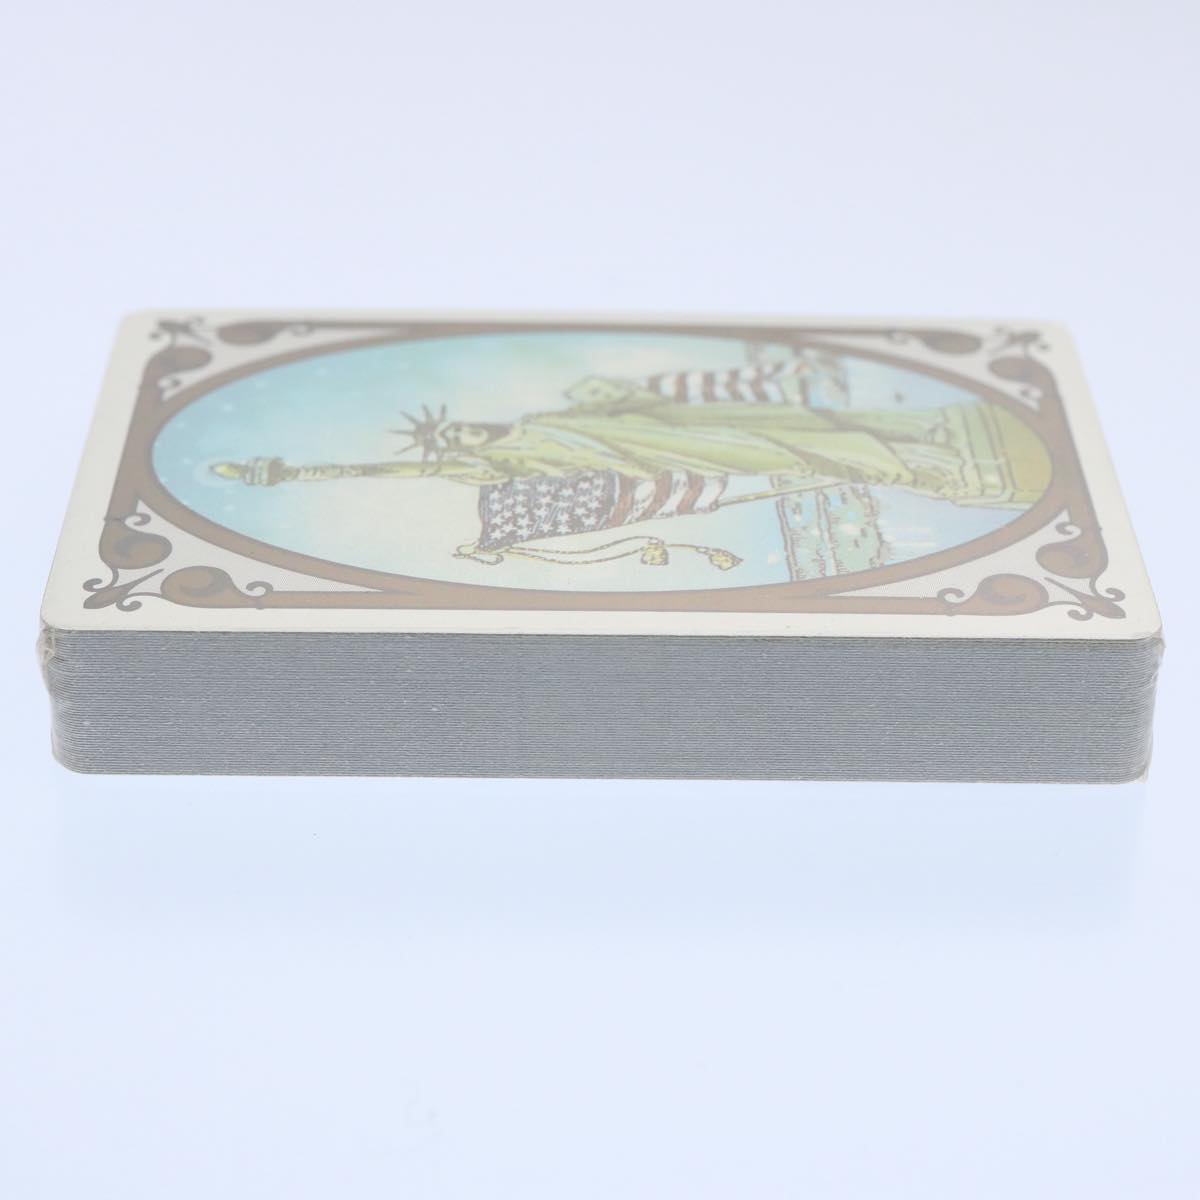 TIFFANY&Co. Playing Cards White Auth 61893